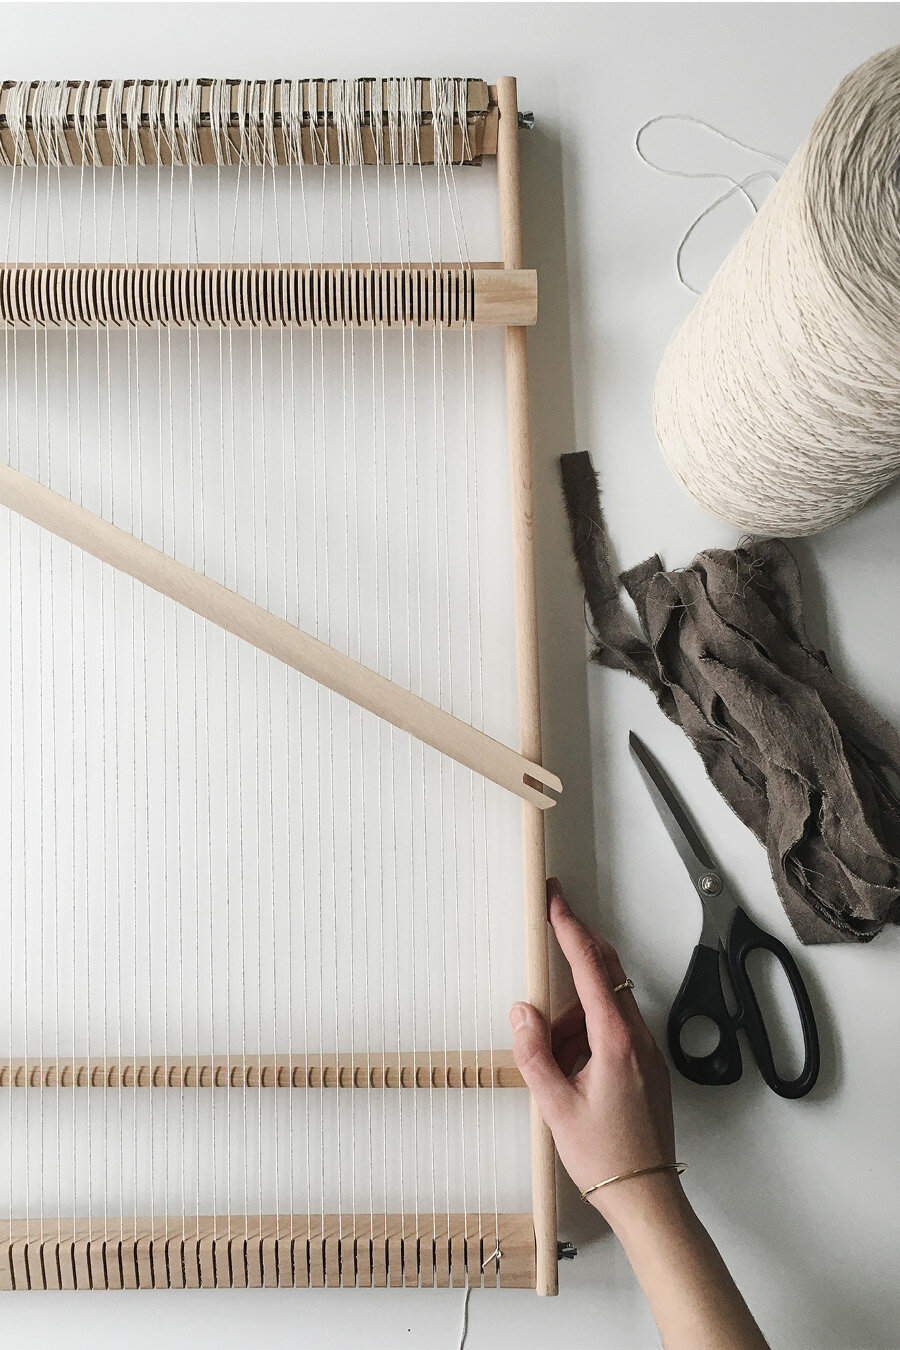 How To Weave A Rag Rug On Frame Loom, How To Hand Weave A Wool Rug